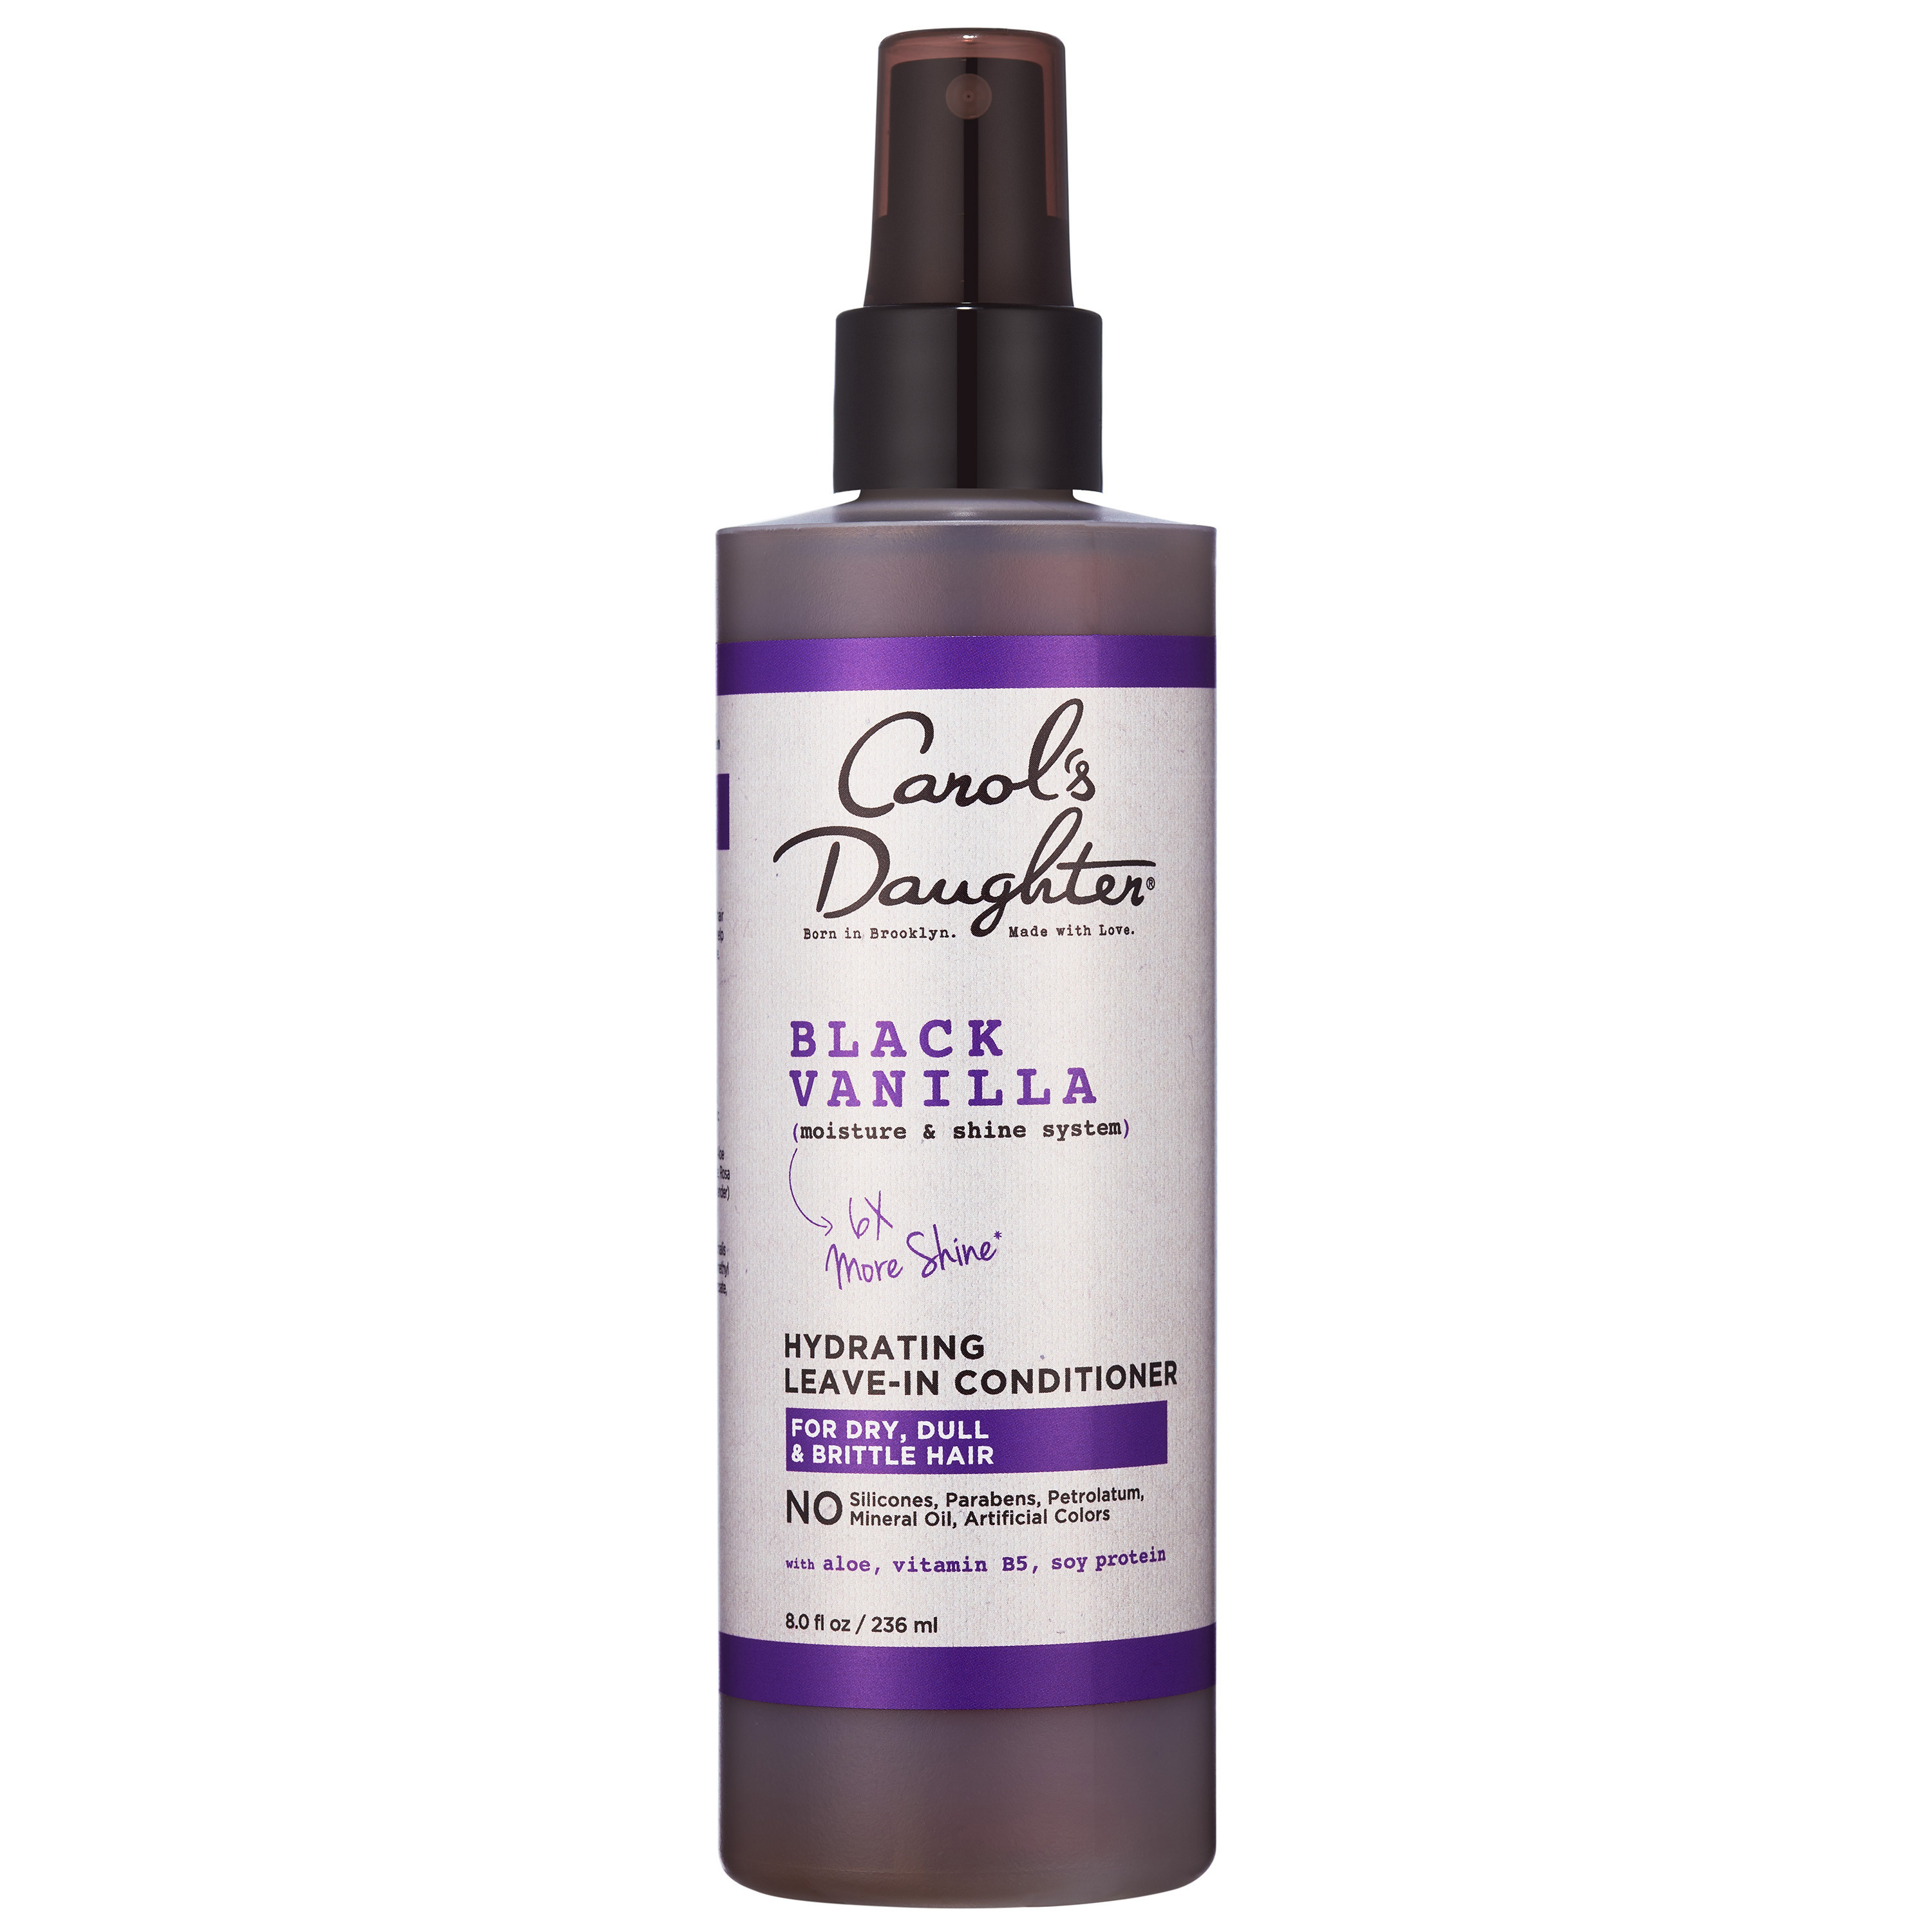 Carol's Daughter Black Vanilla Hydrating Leave In Conditioner with Aloe, 8 fl oz - image 1 of 9